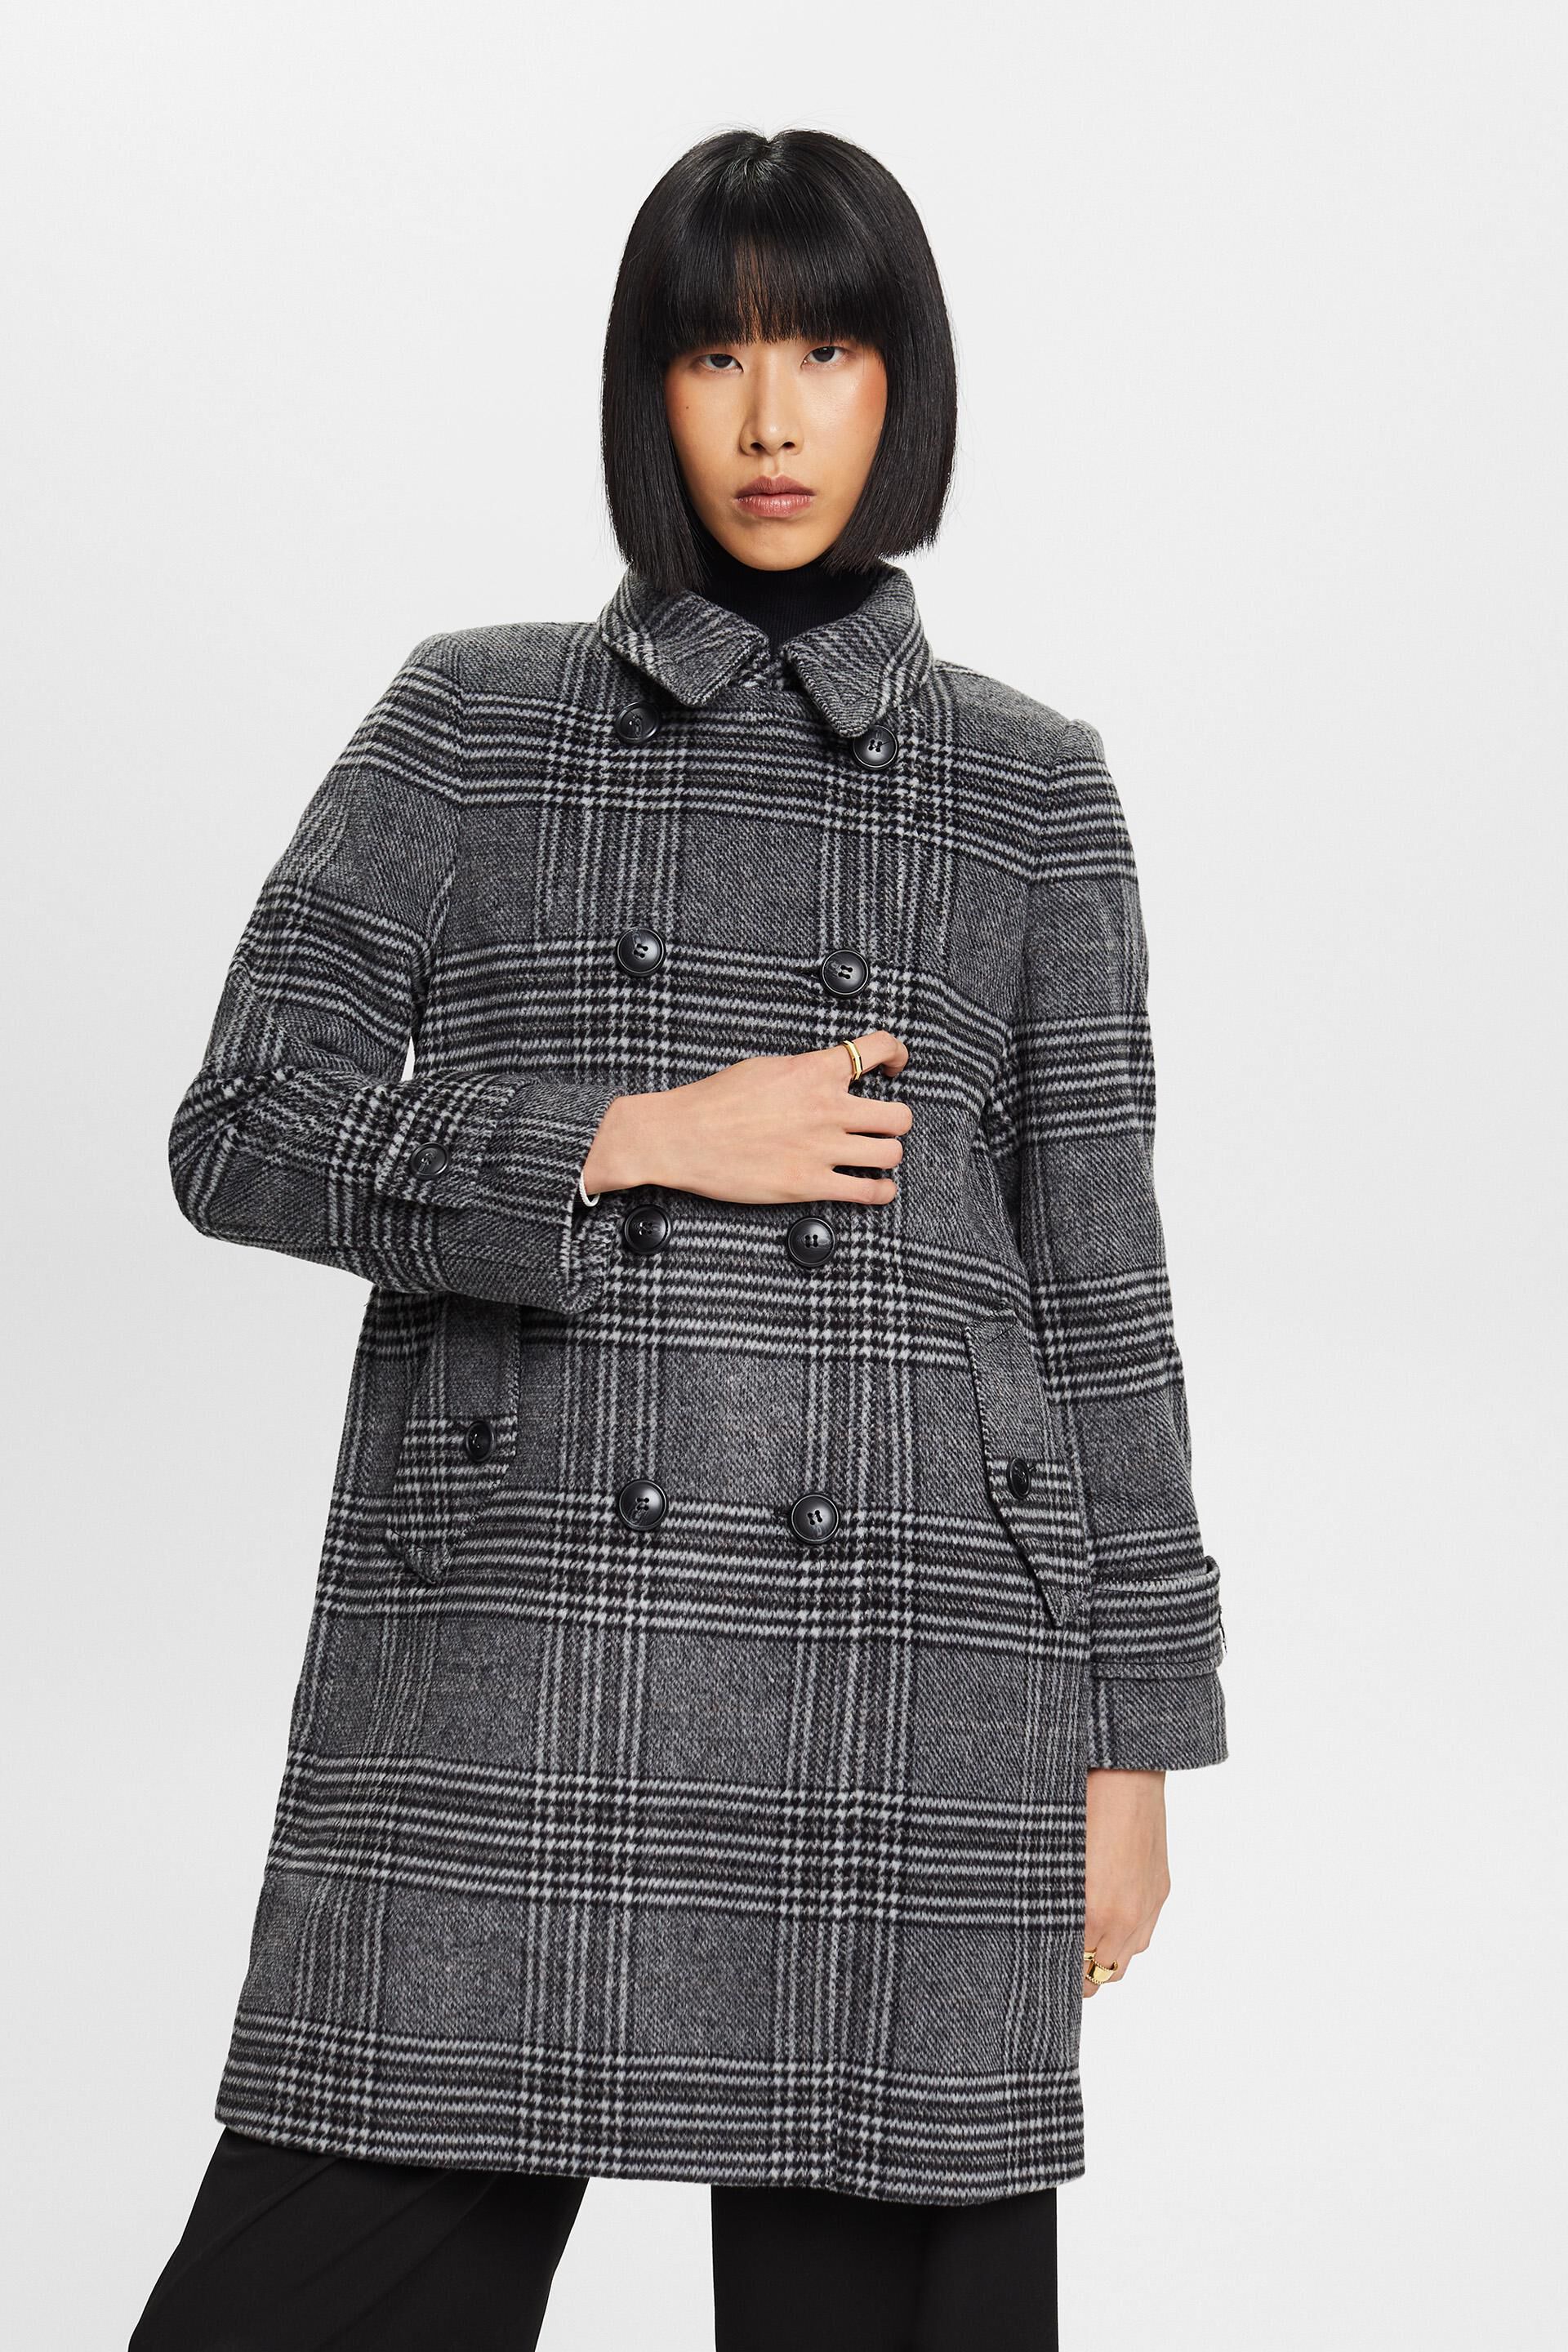 Esprit coat Recycelt: wool blend with checked cashmere